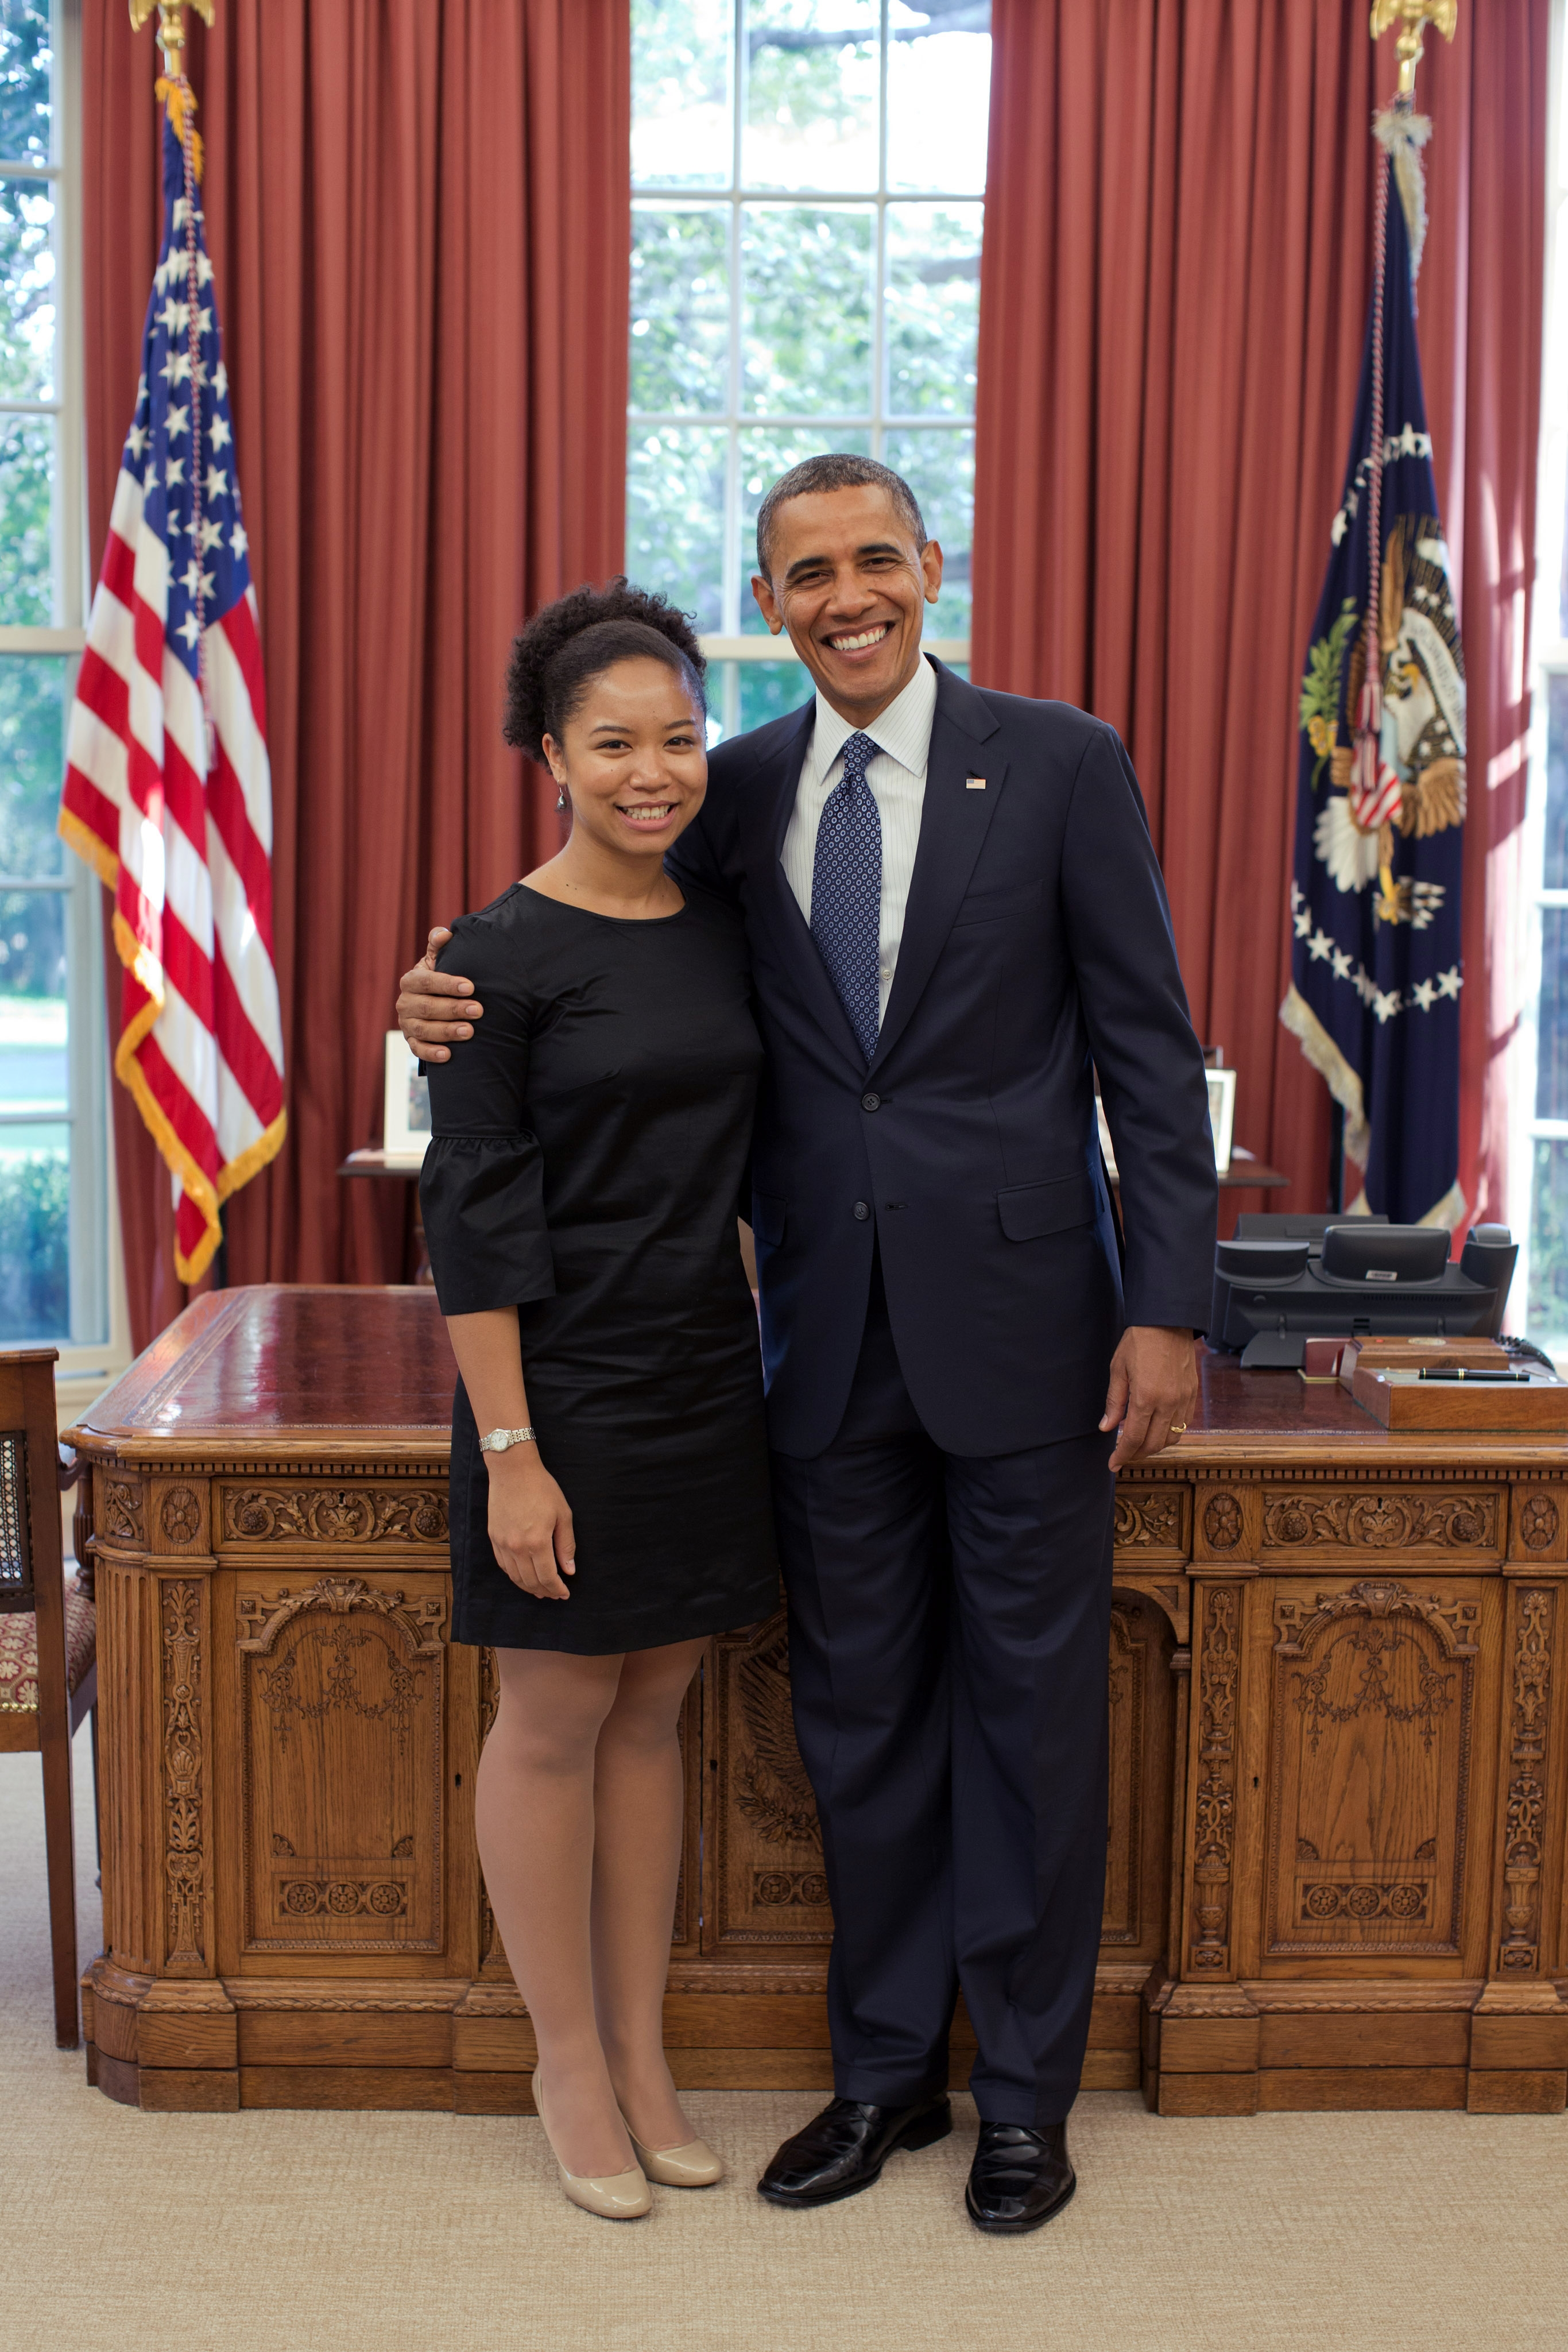 Student, Aerica Banks, recipient of Truman, PPIA, Udall, and (unknown) fellowships pictured with former United States president, Barack Obama, in the oval office